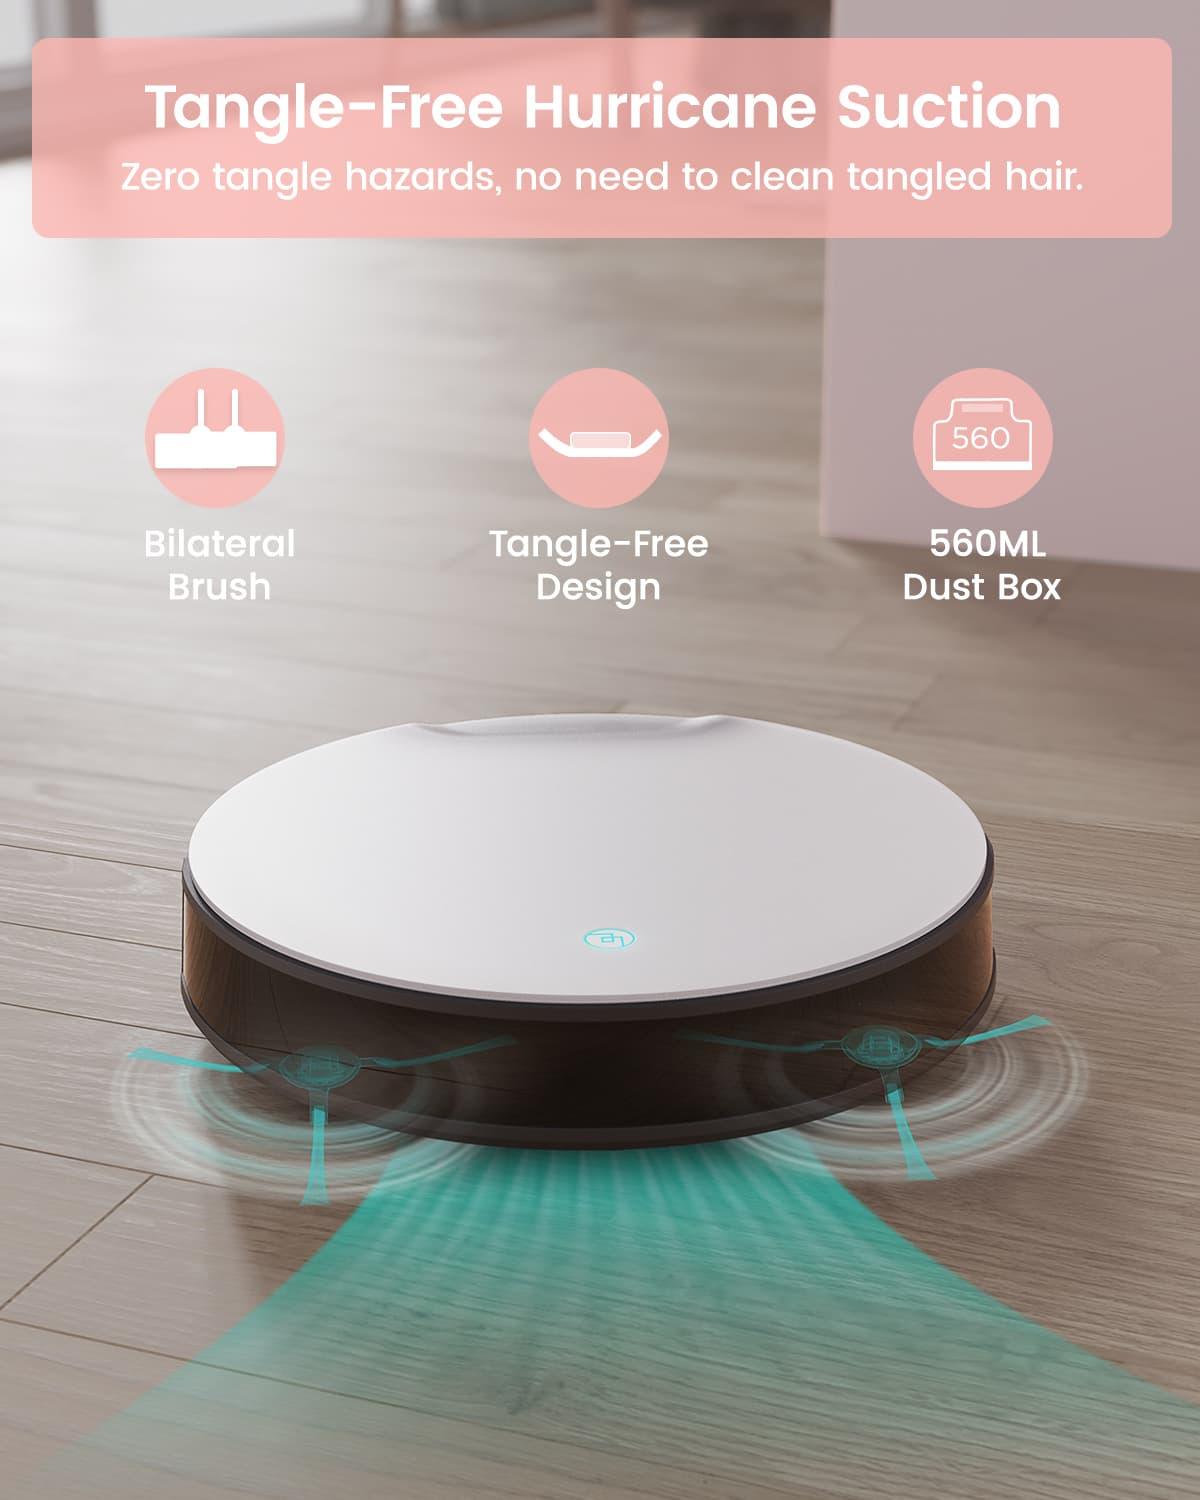 Lefant Robot Vacuum Cleaner, Tangle-Free Suction, Slim, Quite, Automatic  Self-Charging, Wi-Fi/App/Alexa/Remote Control, Good for Pet Hair, Hard  Floor